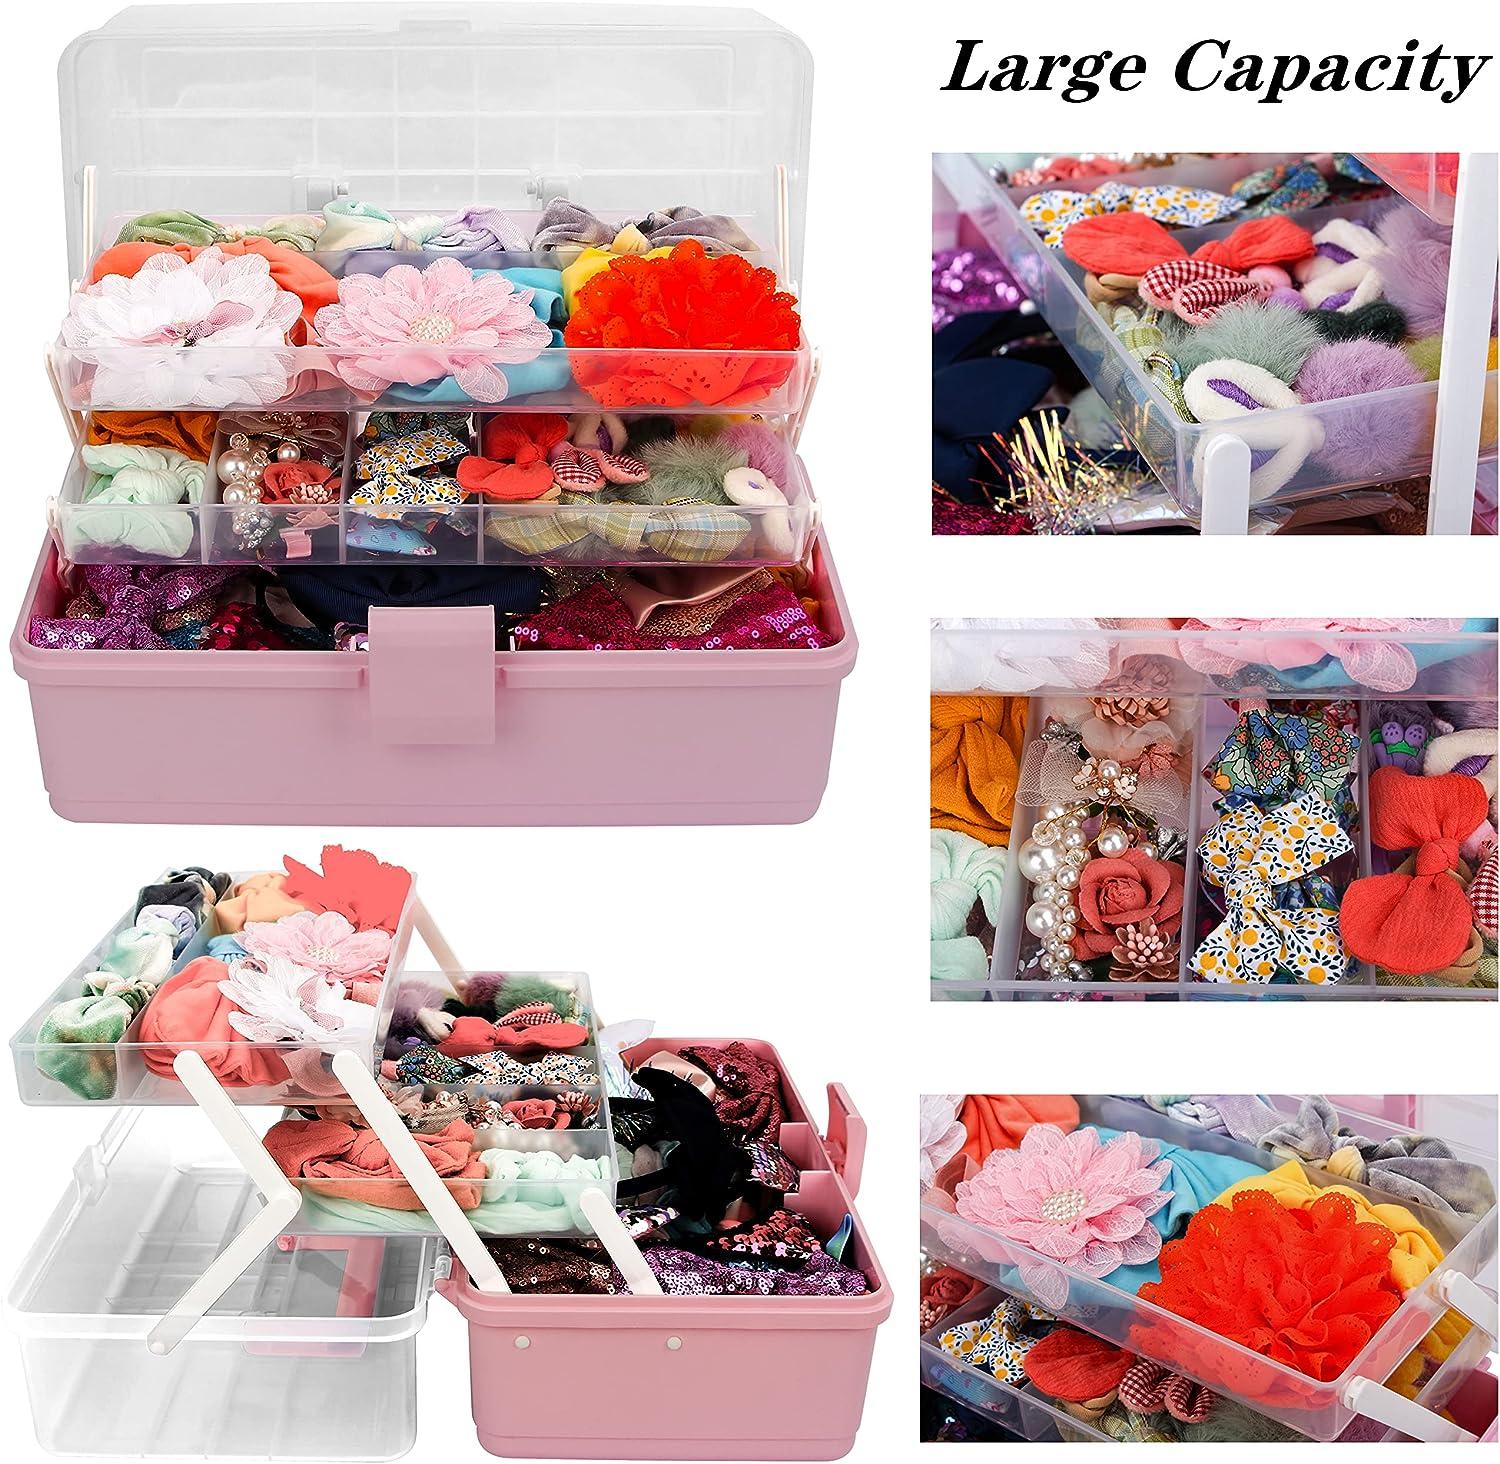 Cute Girls Hair Accessories Storage Organizer Box with Stickers, 3-Layers Plastic Hair Ties Holder Hair Clips Container Headbands Organizer Gift for